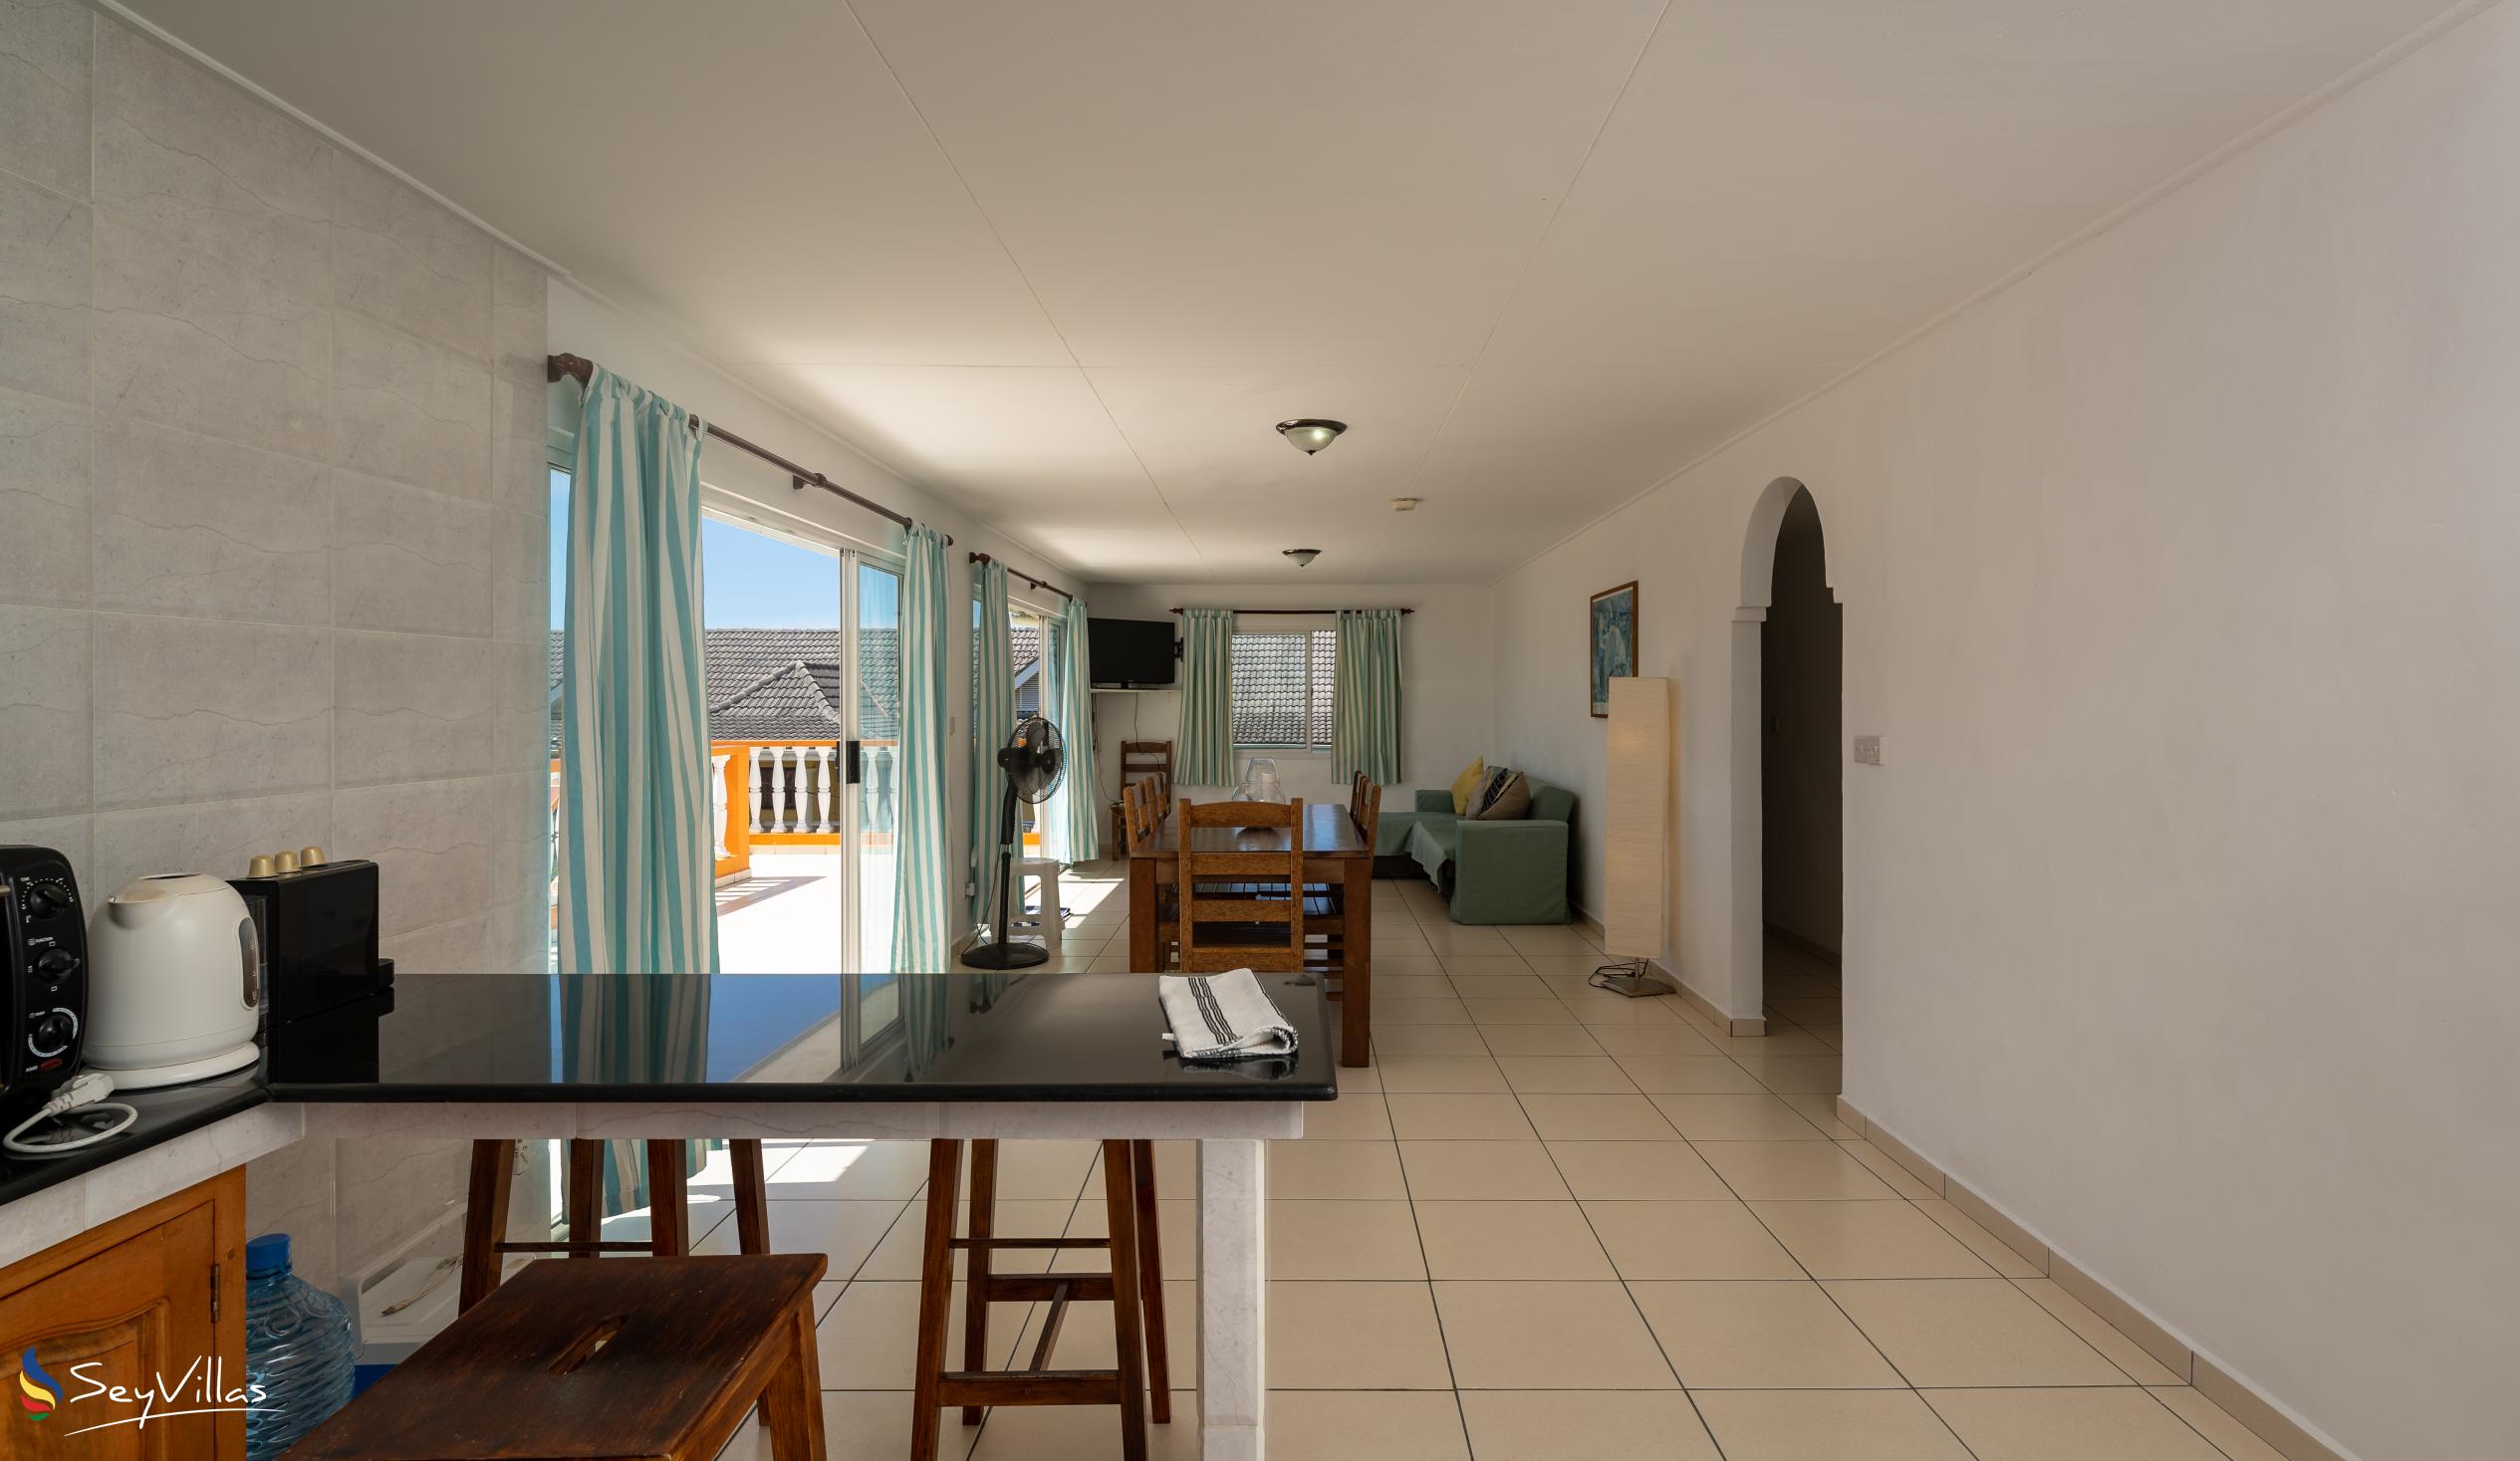 Photo 53: Chez Payet Self Catering - 2-Bedroom Apartment Coco - Mahé (Seychelles)